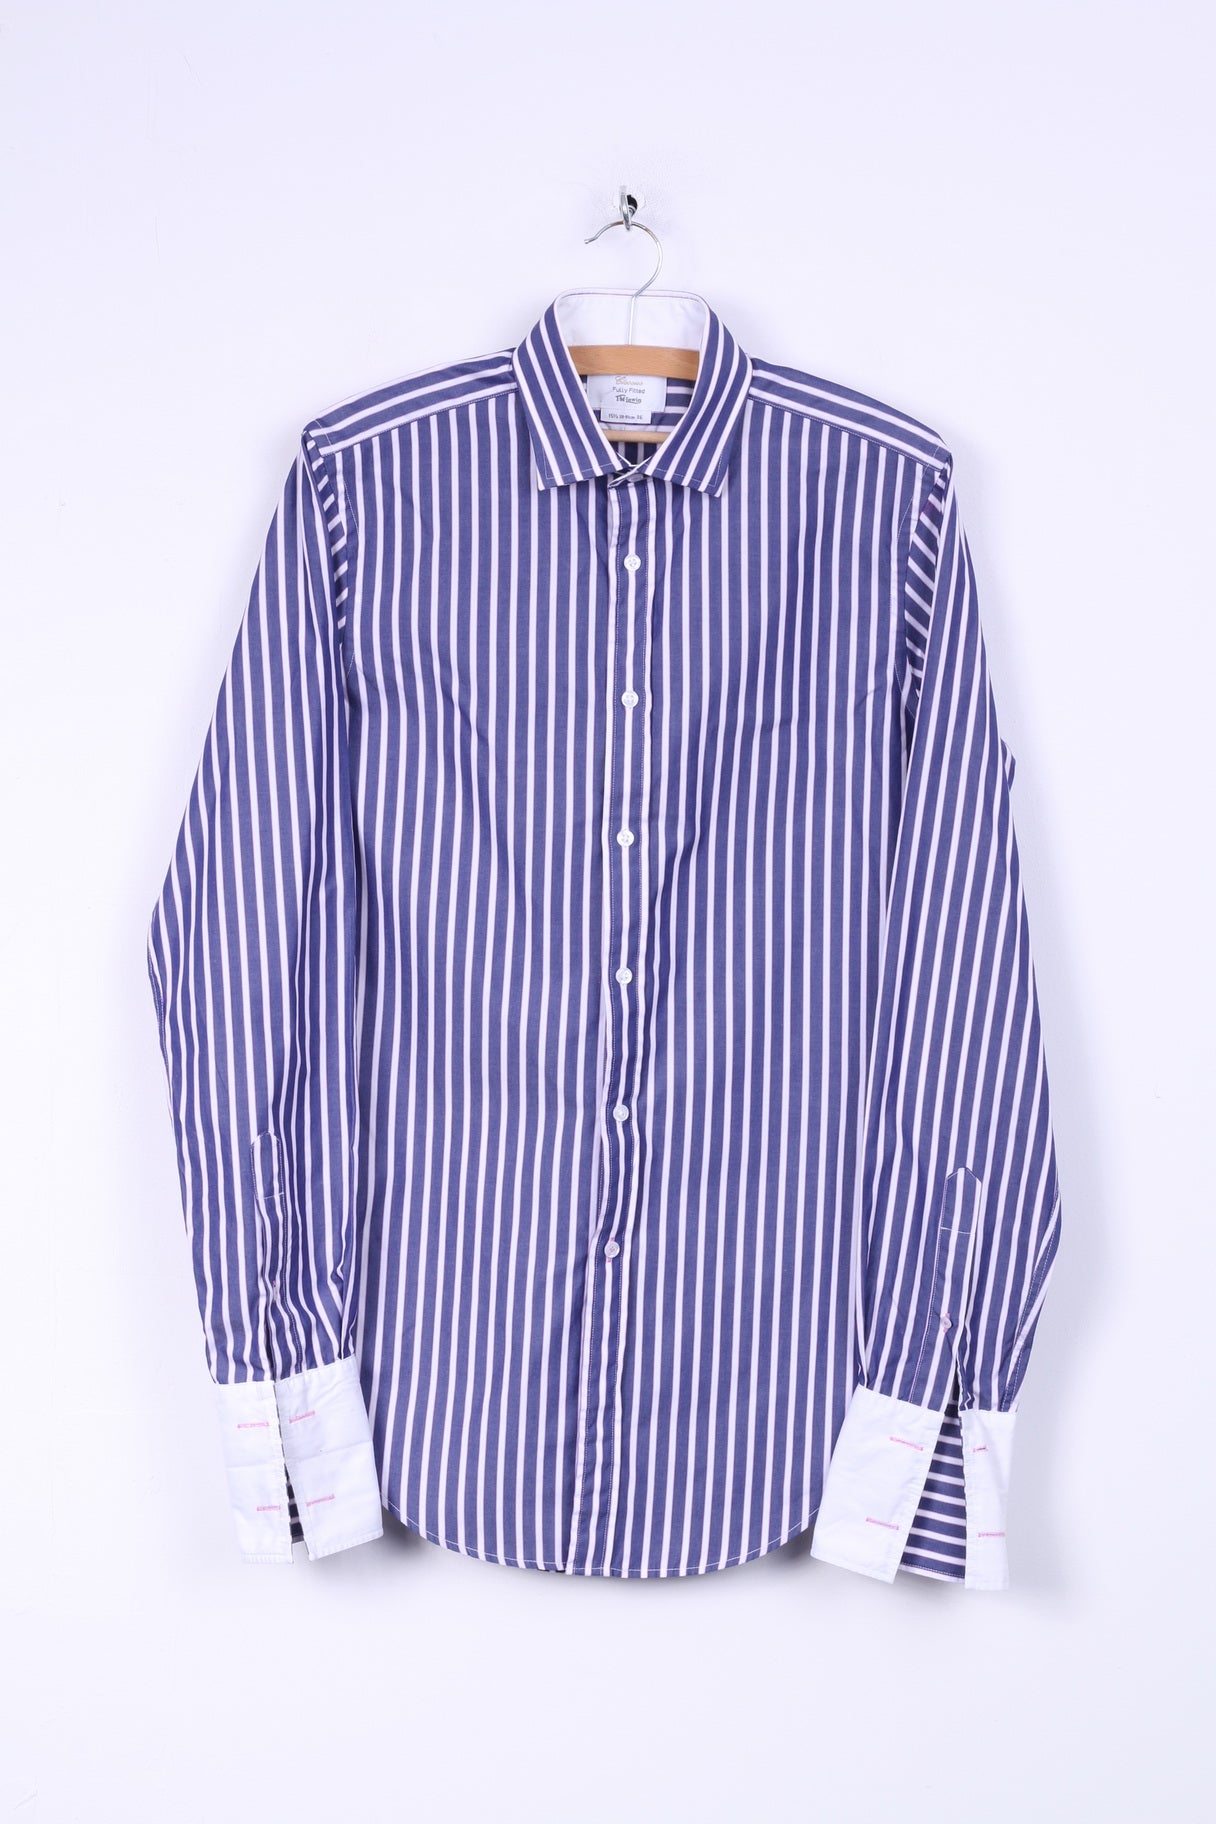 T.M. Lewin Mens 36 15.5 S Formal Shirt Blue Striped Cotton Fully Fitted